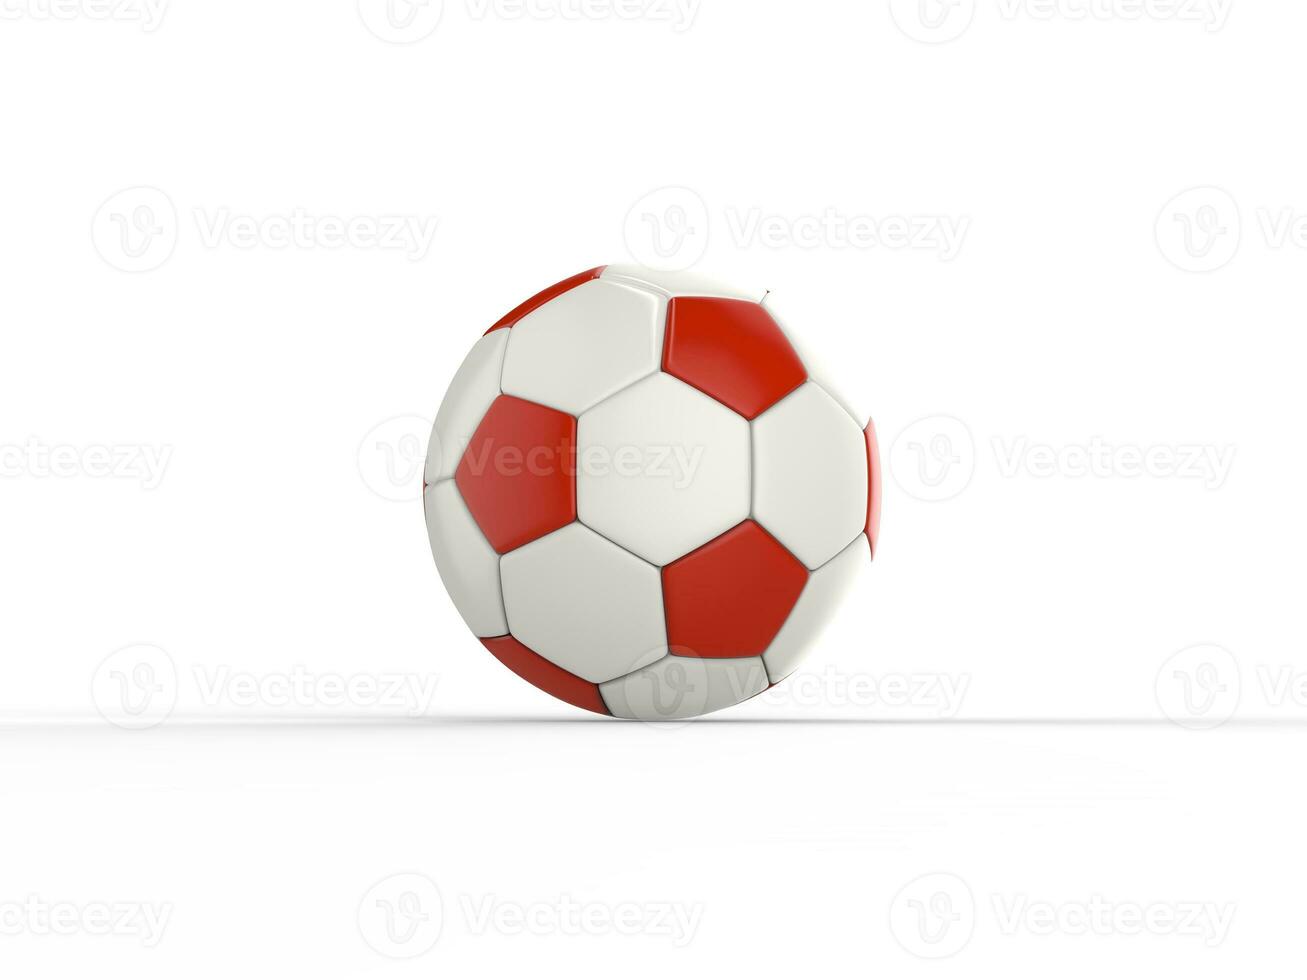 Red and white football - side view photo